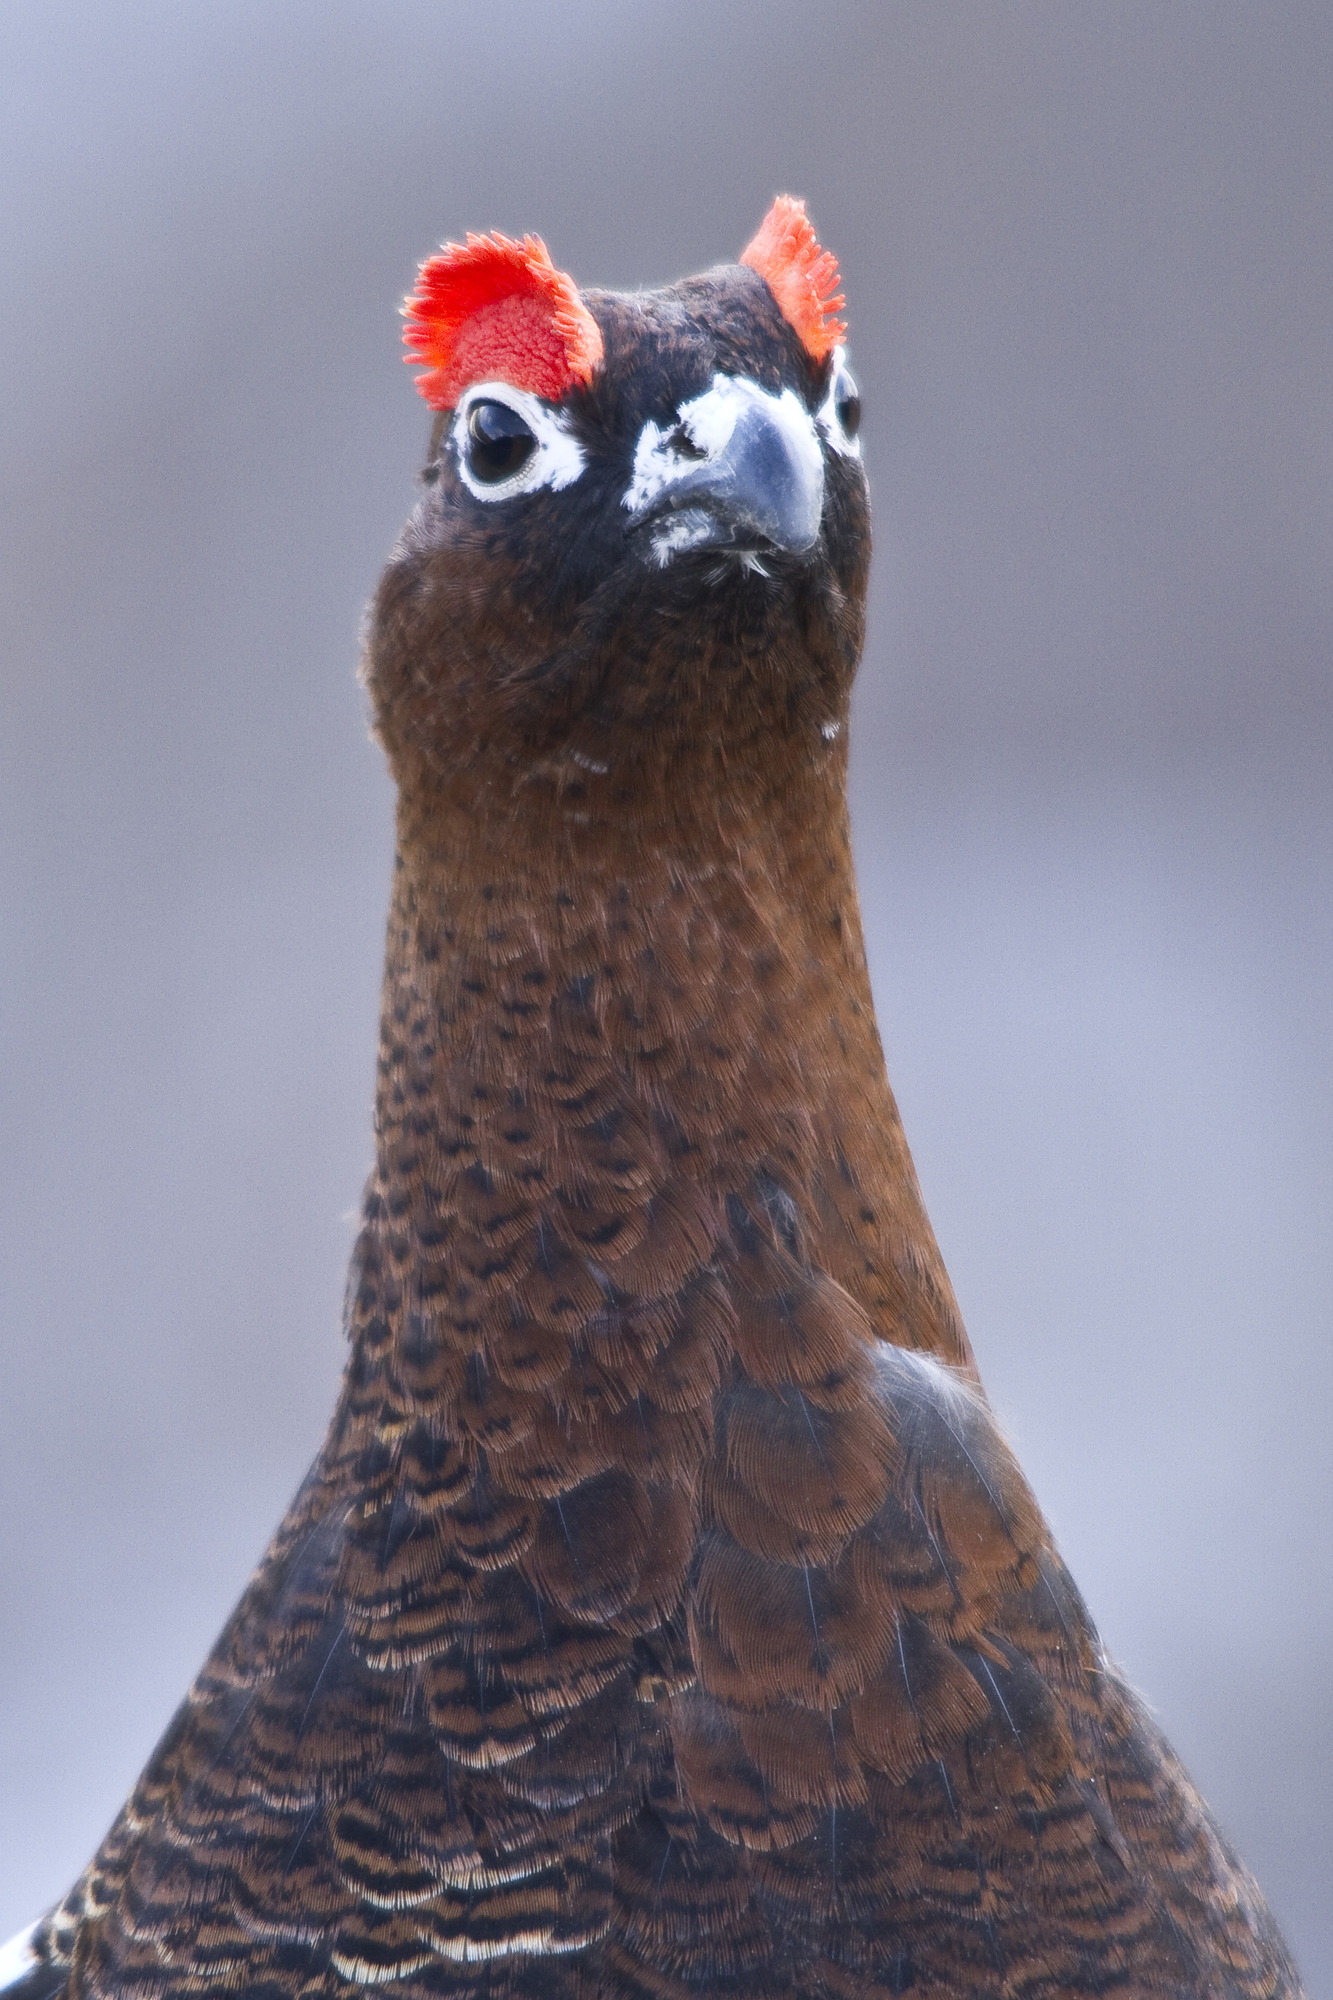 A male ptarmigan with red eye crests raised